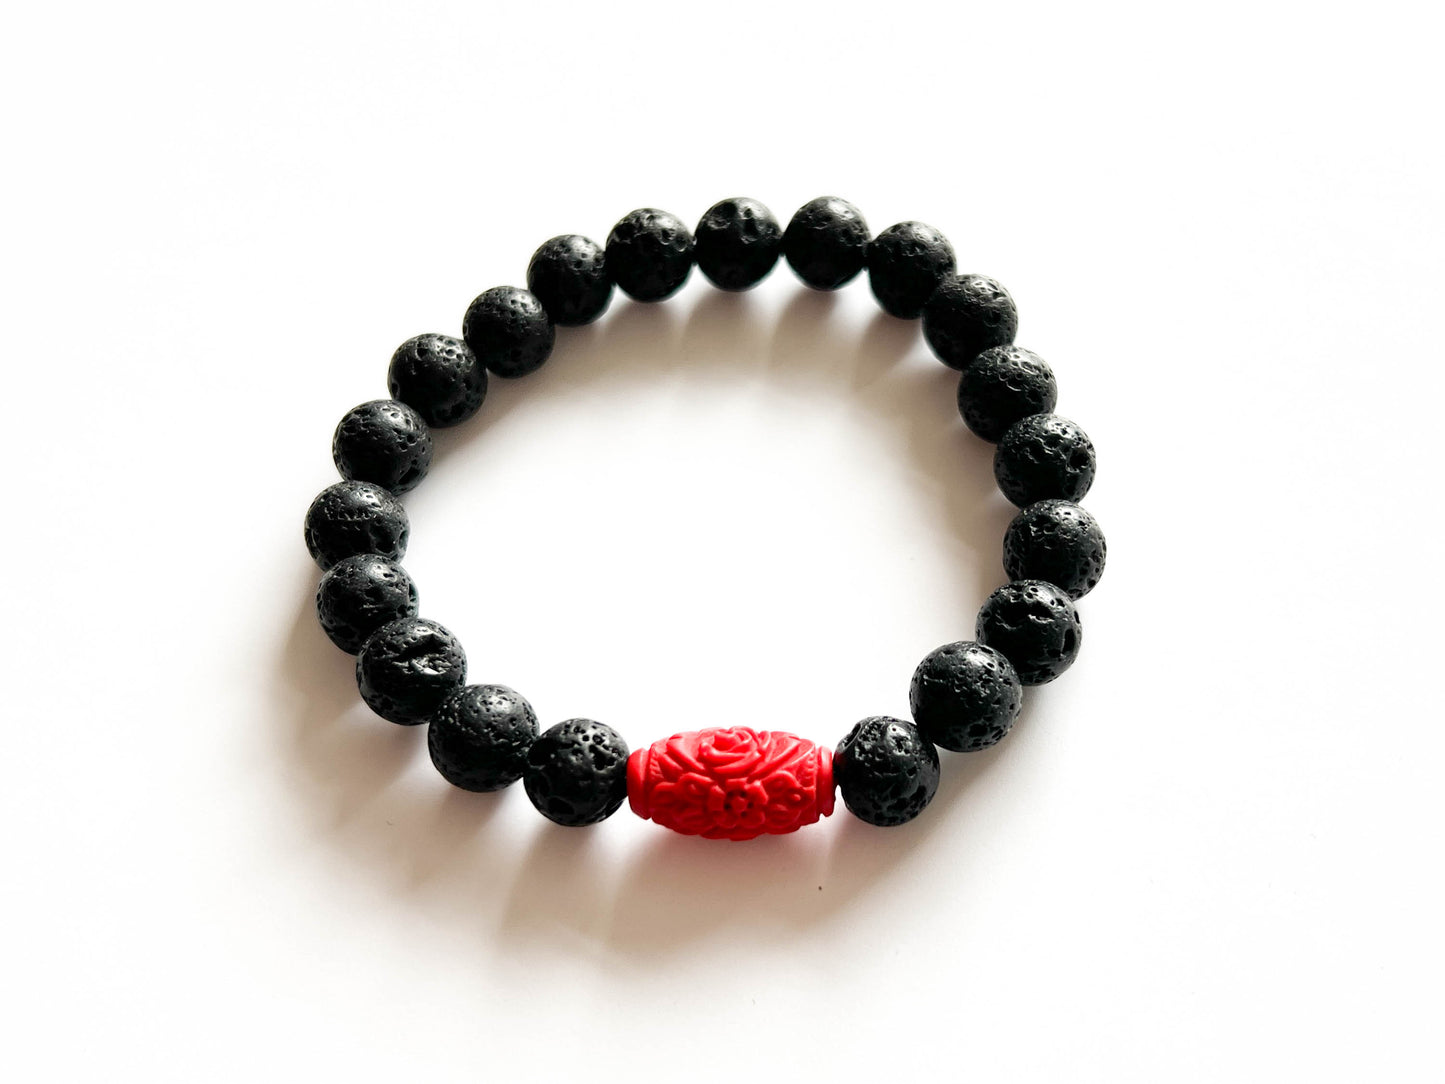 Black Lava stone and red flower bead bracelet - stretch - essential oil diffuser jewellery